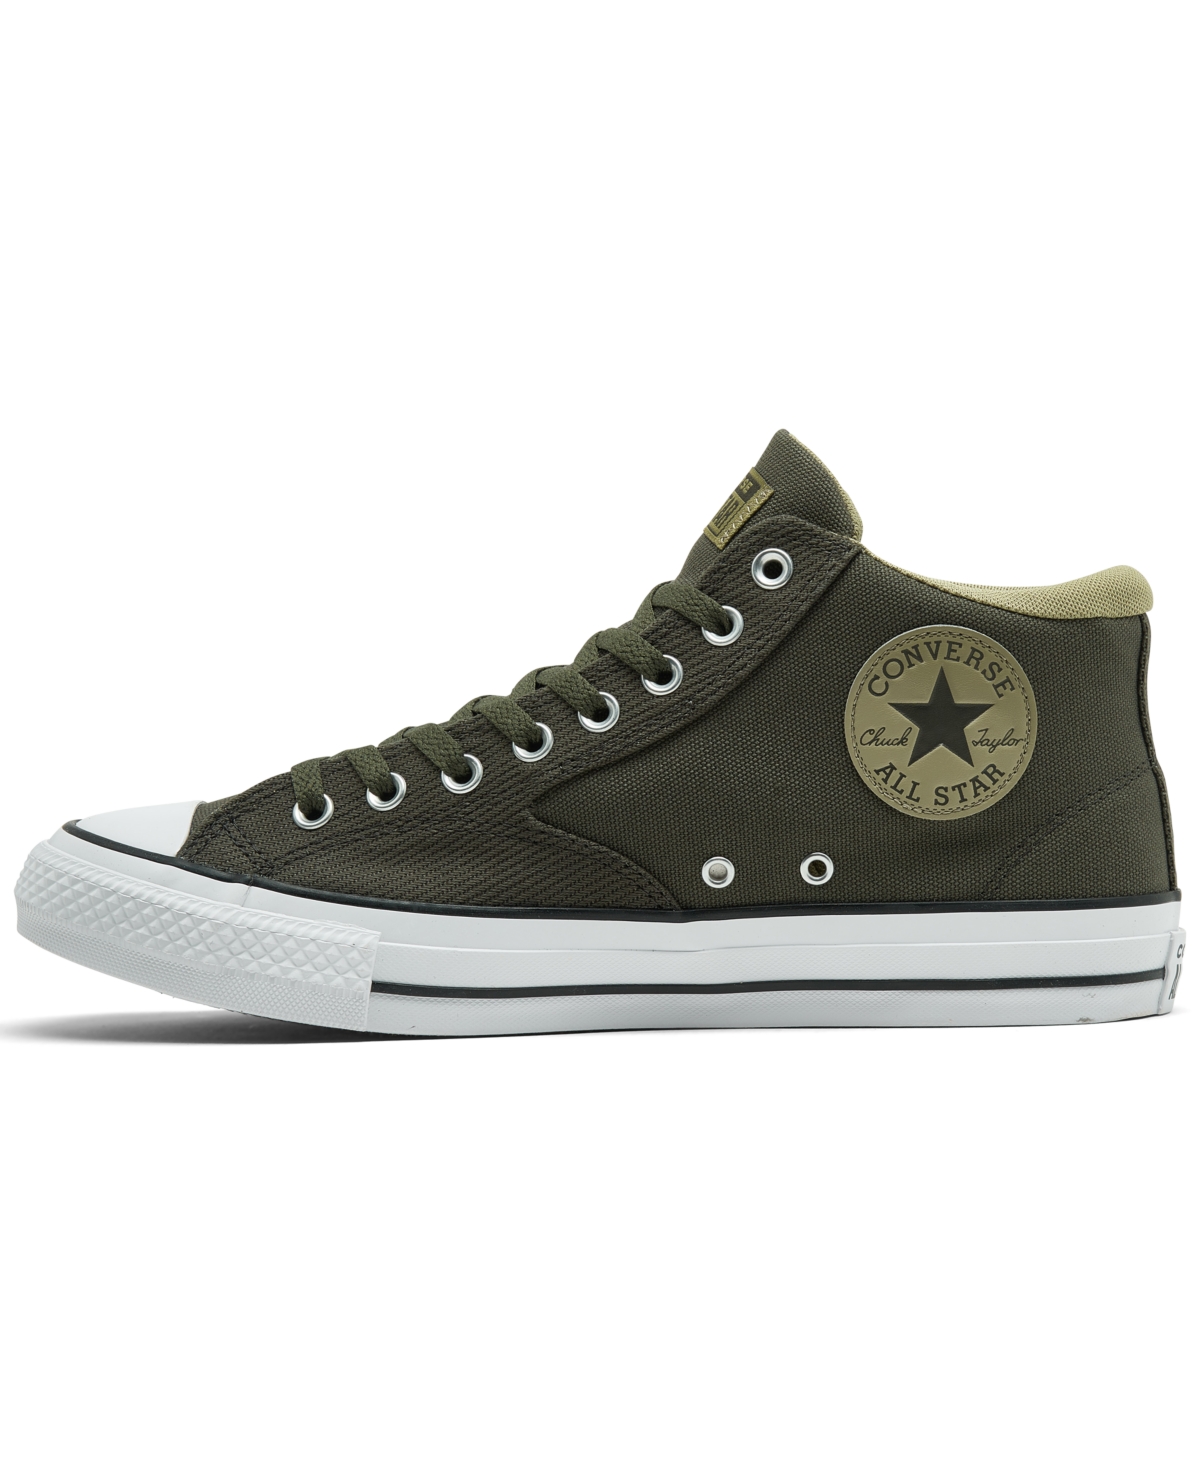 Shop Converse Men's Chuck Taylor All Star Malden Street Casual Sneakers From Finish Line In Cave Green,mossy Green